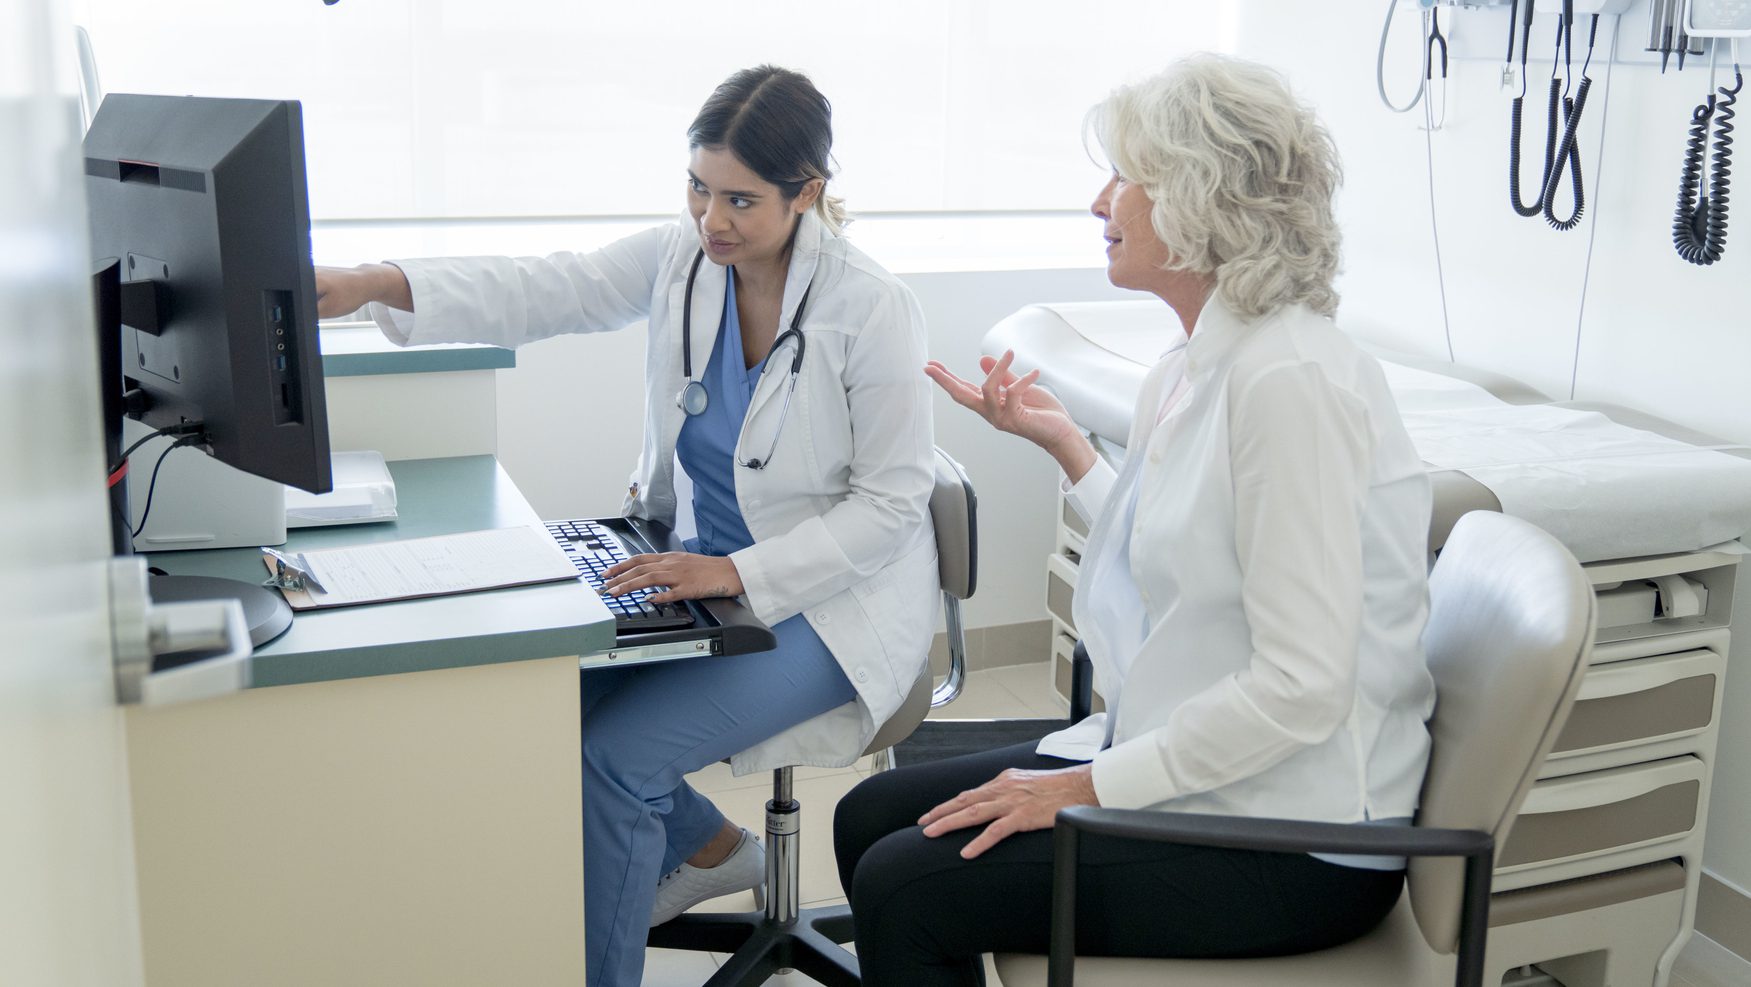 A Southeastern Asian female doctor sits inside an exam room and points to her computer while older Caucasian female sits next to her asking questions